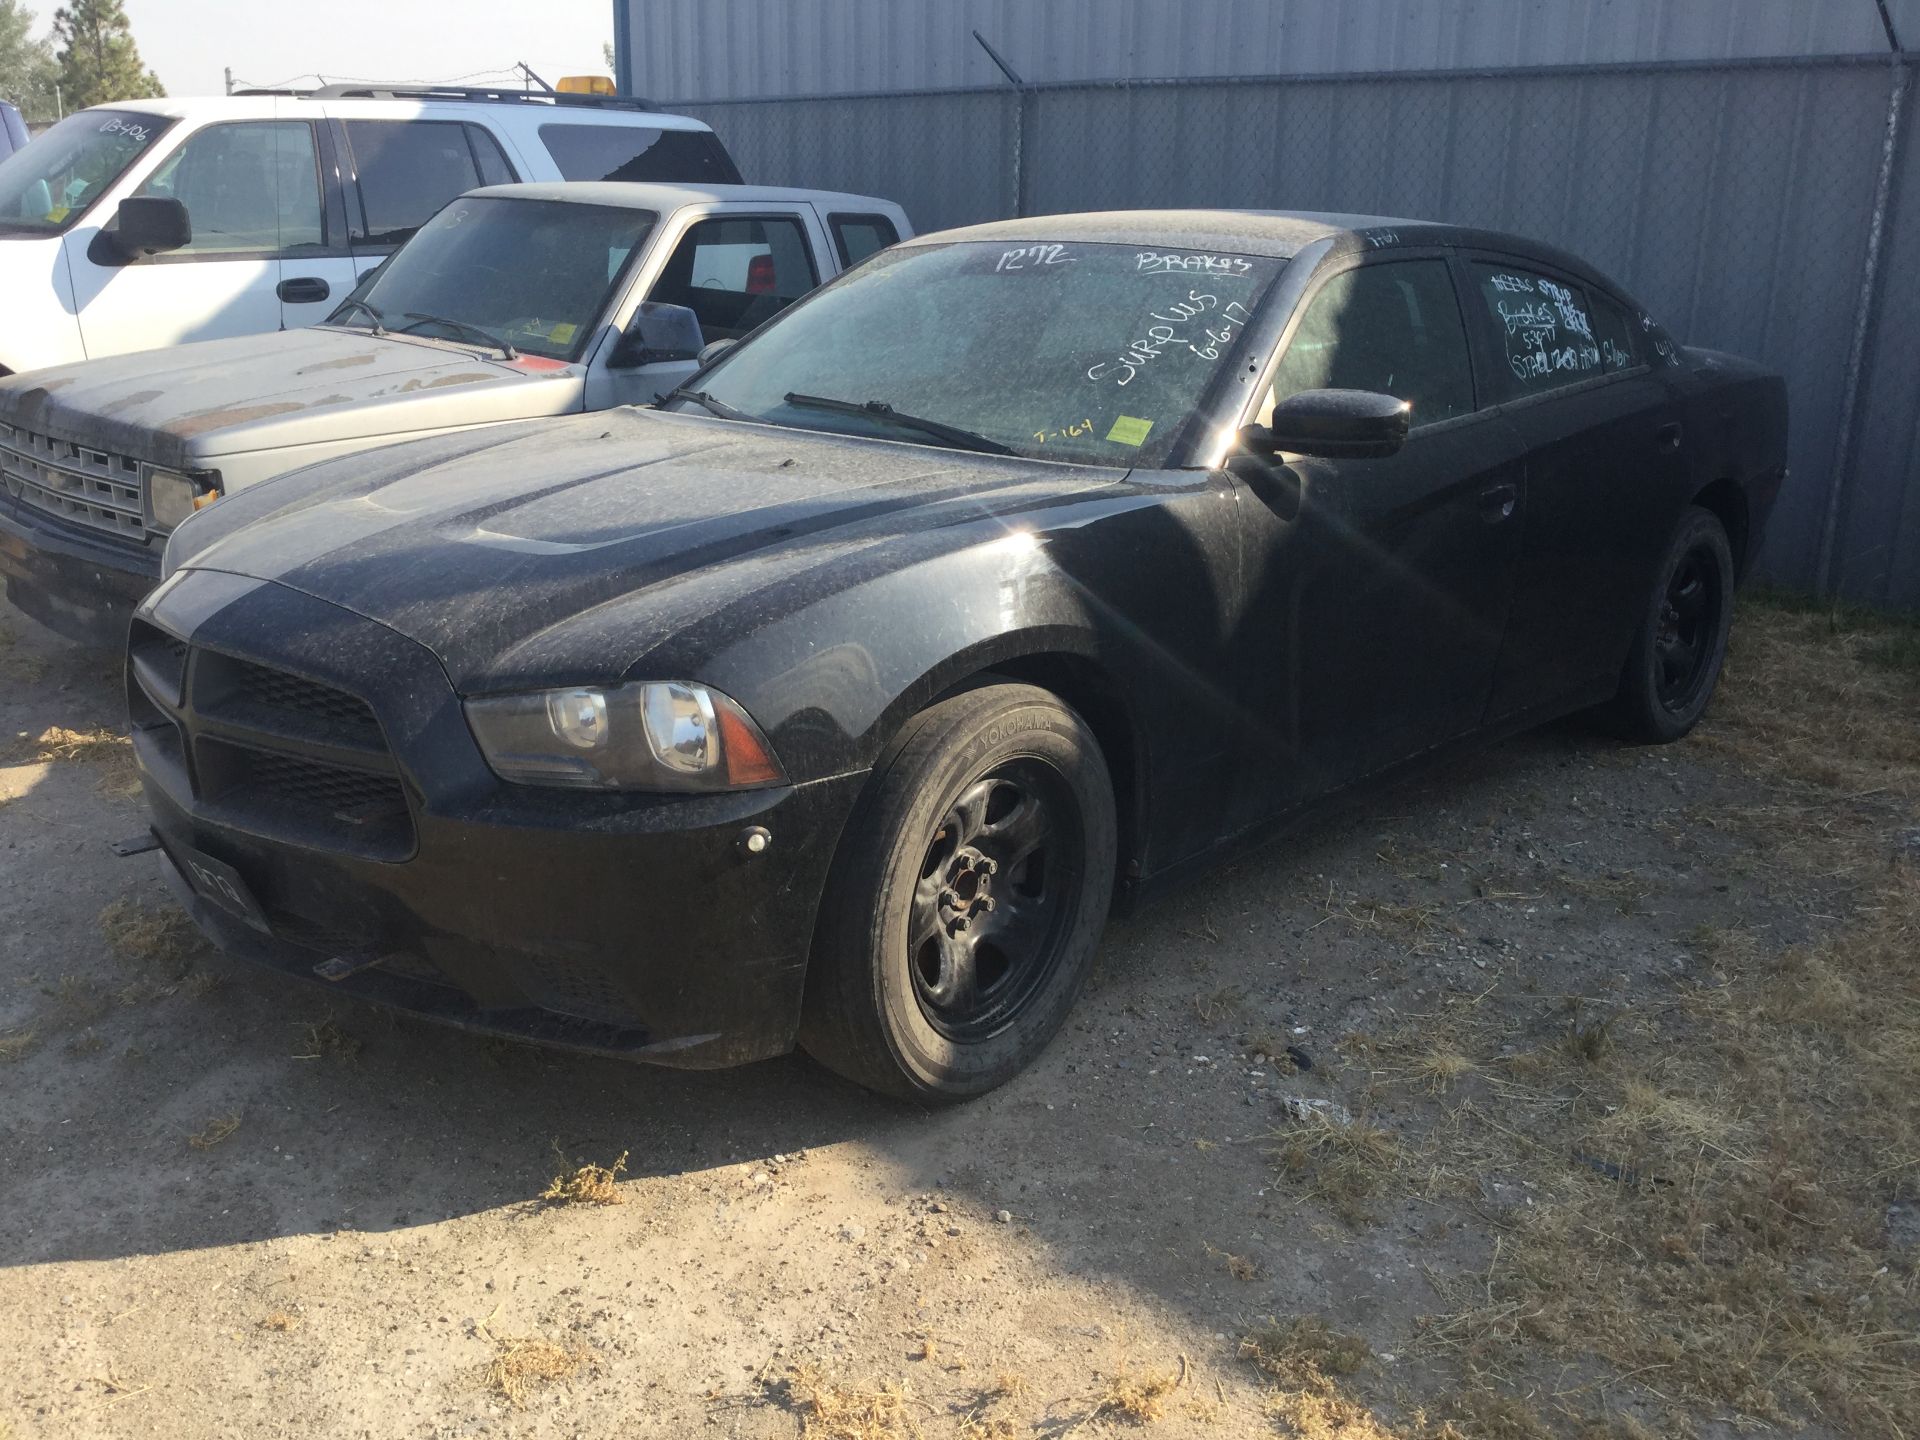 Year: 2012 Make: Dodge Model: Charger Type: Sedan Vin#: 234161 Mileage/Hours: 103568 5.7L, Auto,